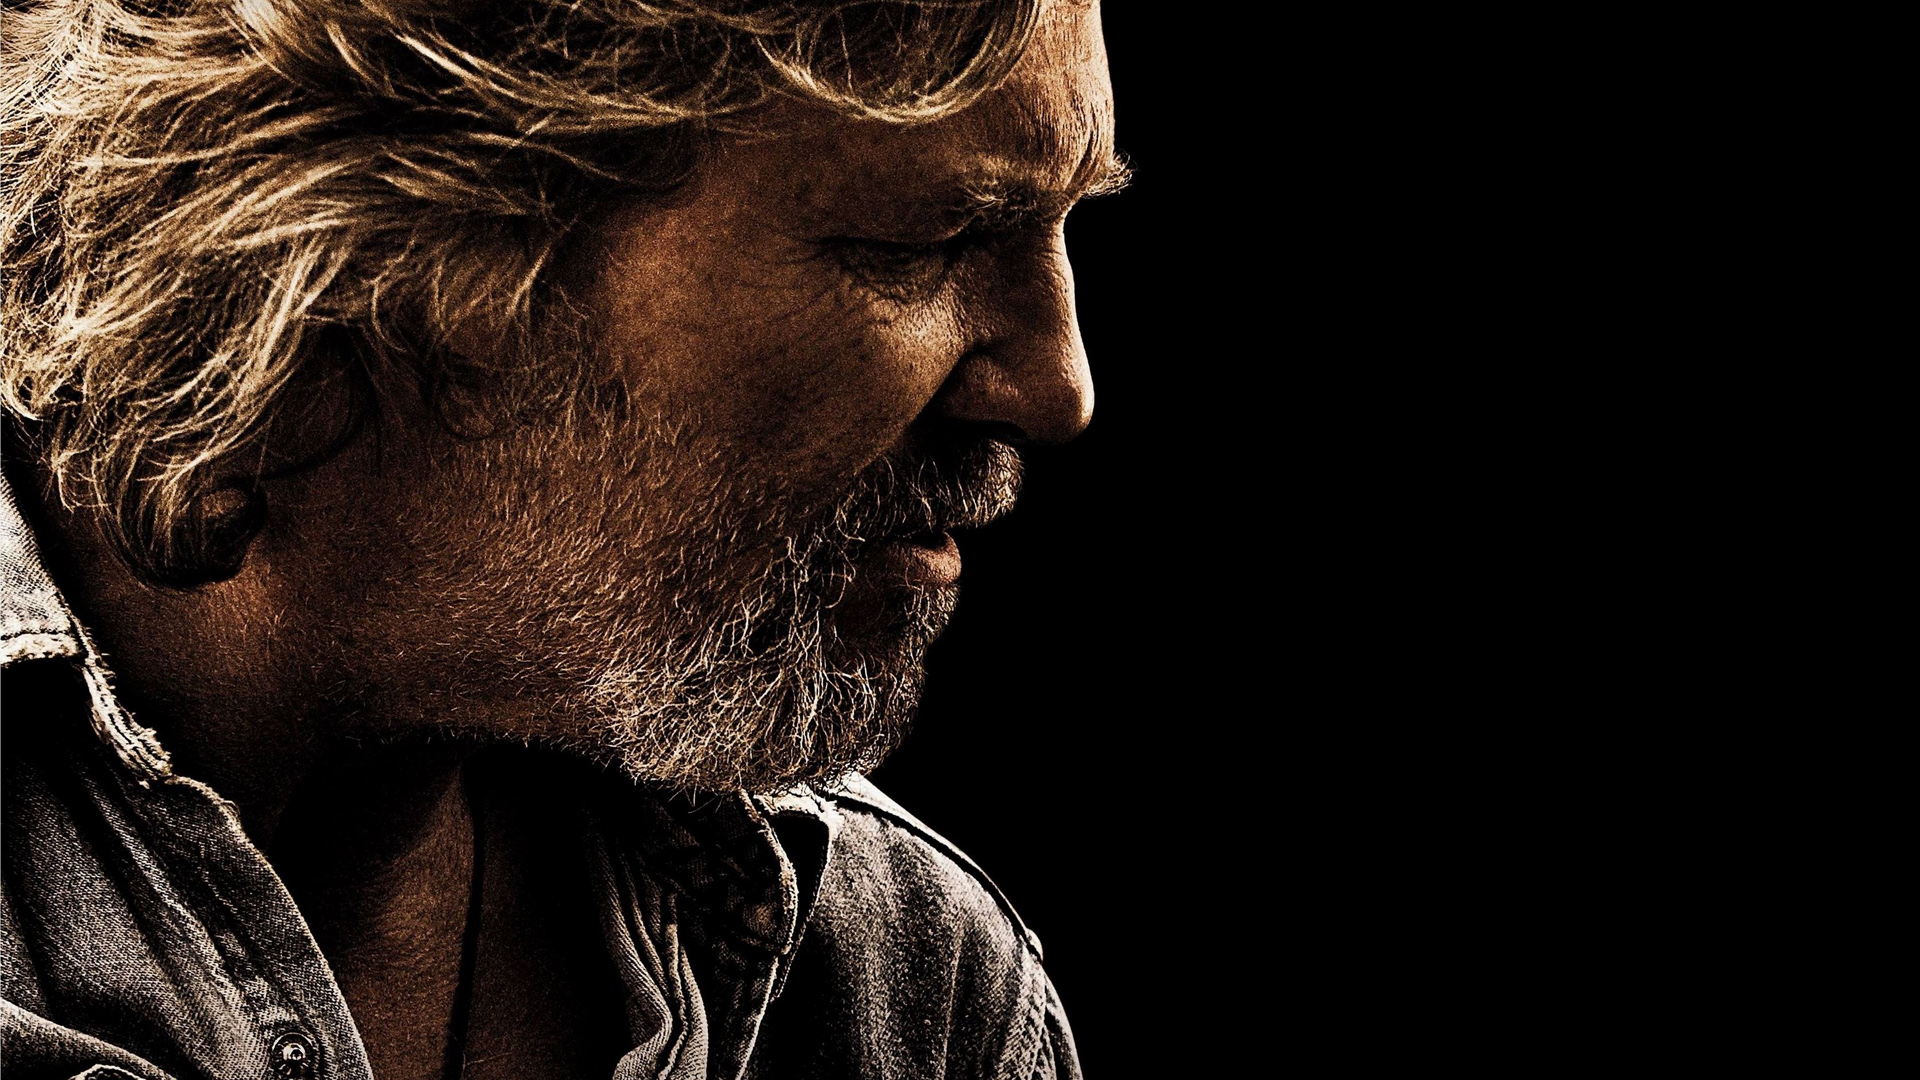 Movie Crazy Heart HD Wallpaper | Background Image